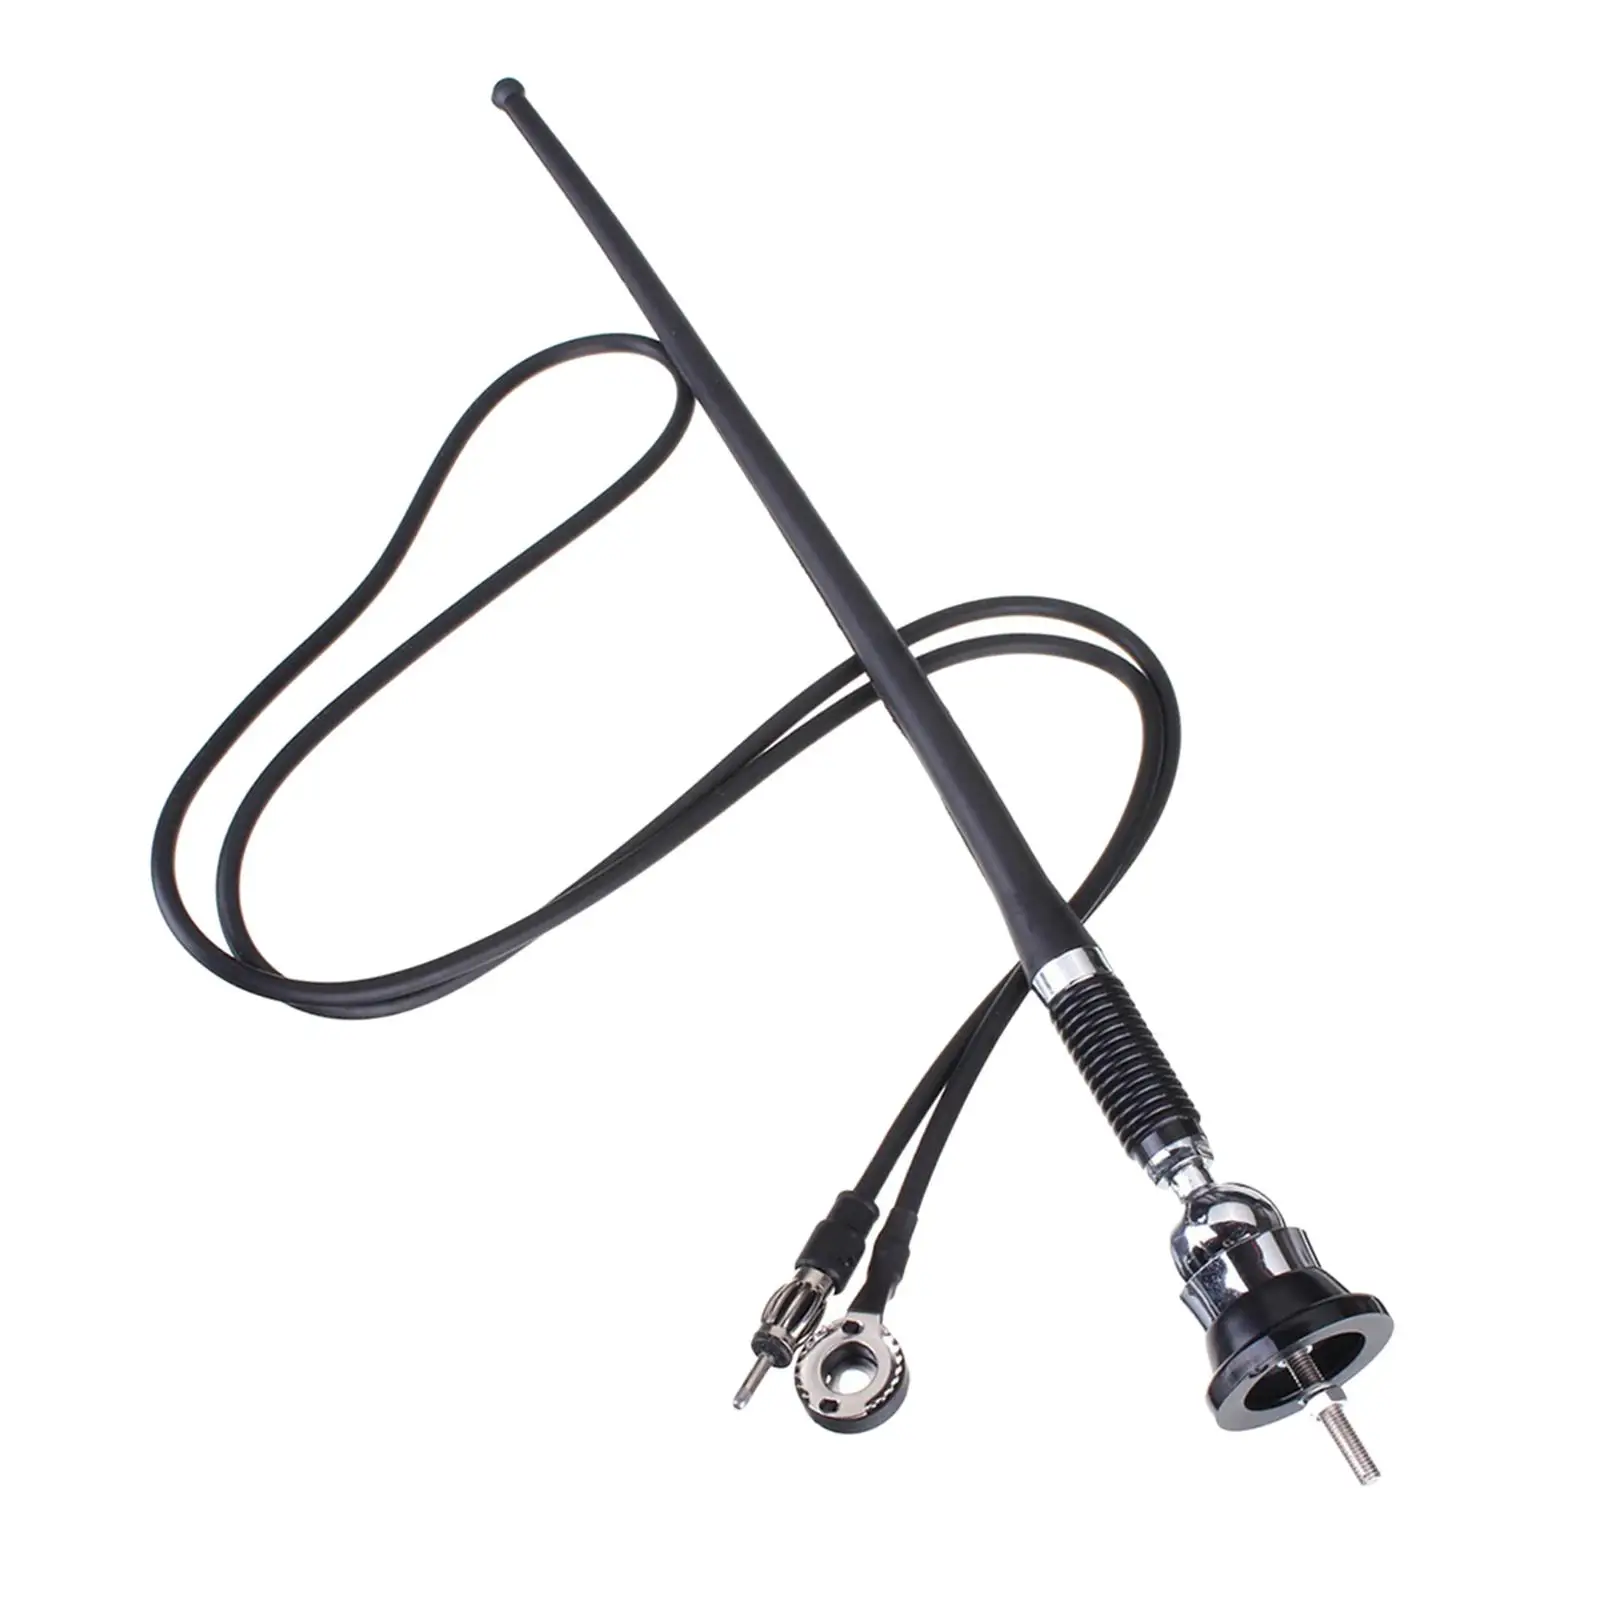 Universal Car Roof Antenna with Swivel Base Car Radio AM/FM Antenna   Antenna Replaces Rubber Adjustable Black